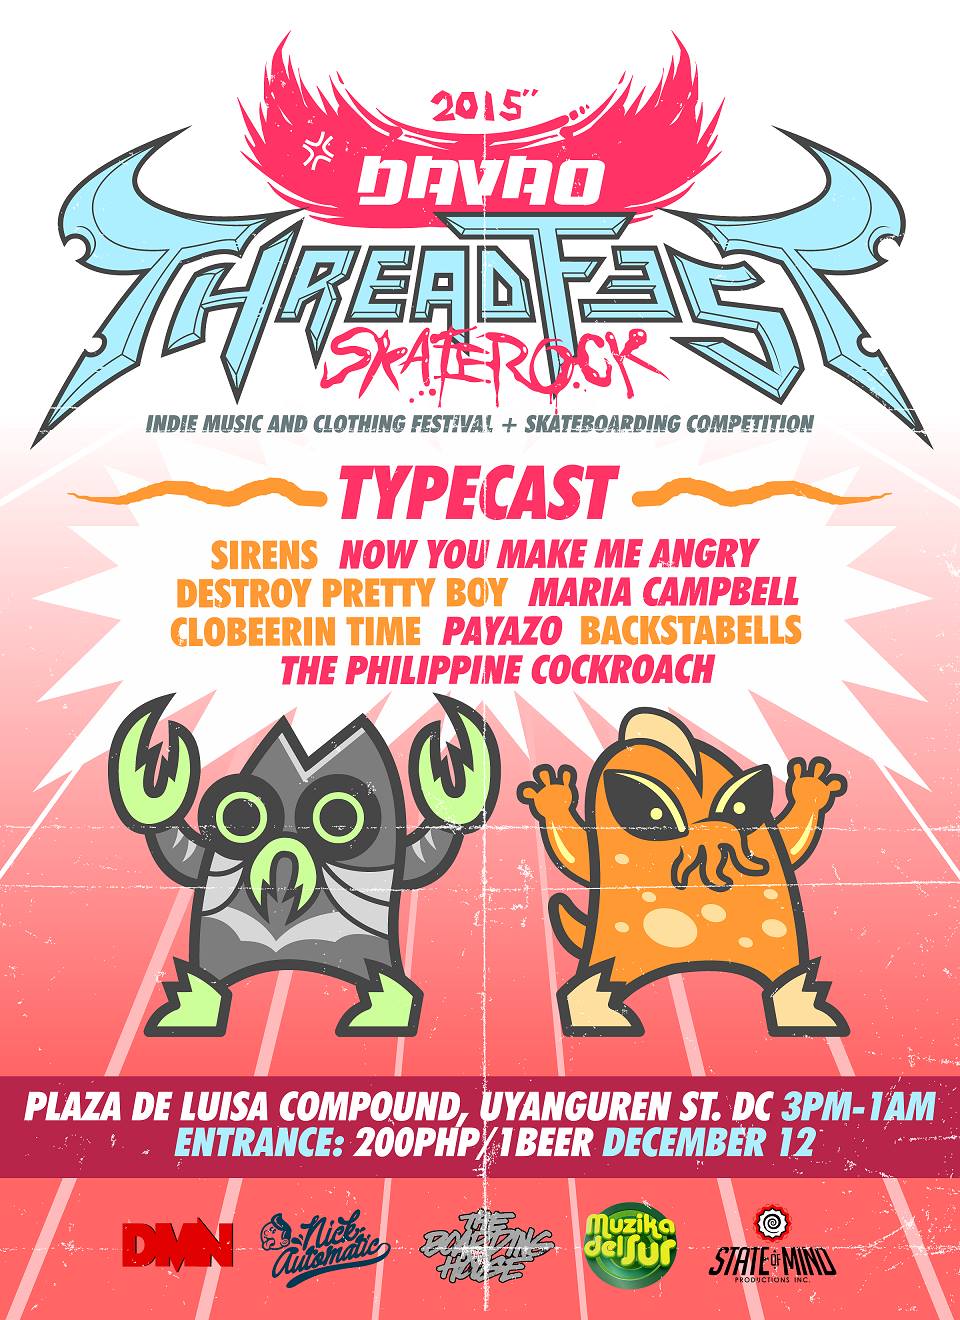 Threadfest x Skaterock Davao 2015 Saturday, December 12 at 3:00pm Show Map Plaza De Luisa 8000 Davao City, Philippines Davao Music Nation x NICK AUTOMATIC™ x Theboardinghouse Skateshop PROUDLY PRESENT - THREADFEST X SKATEROCK 2015 Indie Music and Clothing Festival + Skateboarding Competition - Typecast Destroy Pretty Boy Sirens Now You Make Me Angry The Philippine Cockroach Maria Campbell Payazo Backstabells Clobeerin Time - December 12, 2015 3PM-1AM Skateboarding Competition in the afternoon Bands in the evening Selling of merch throughout the day!